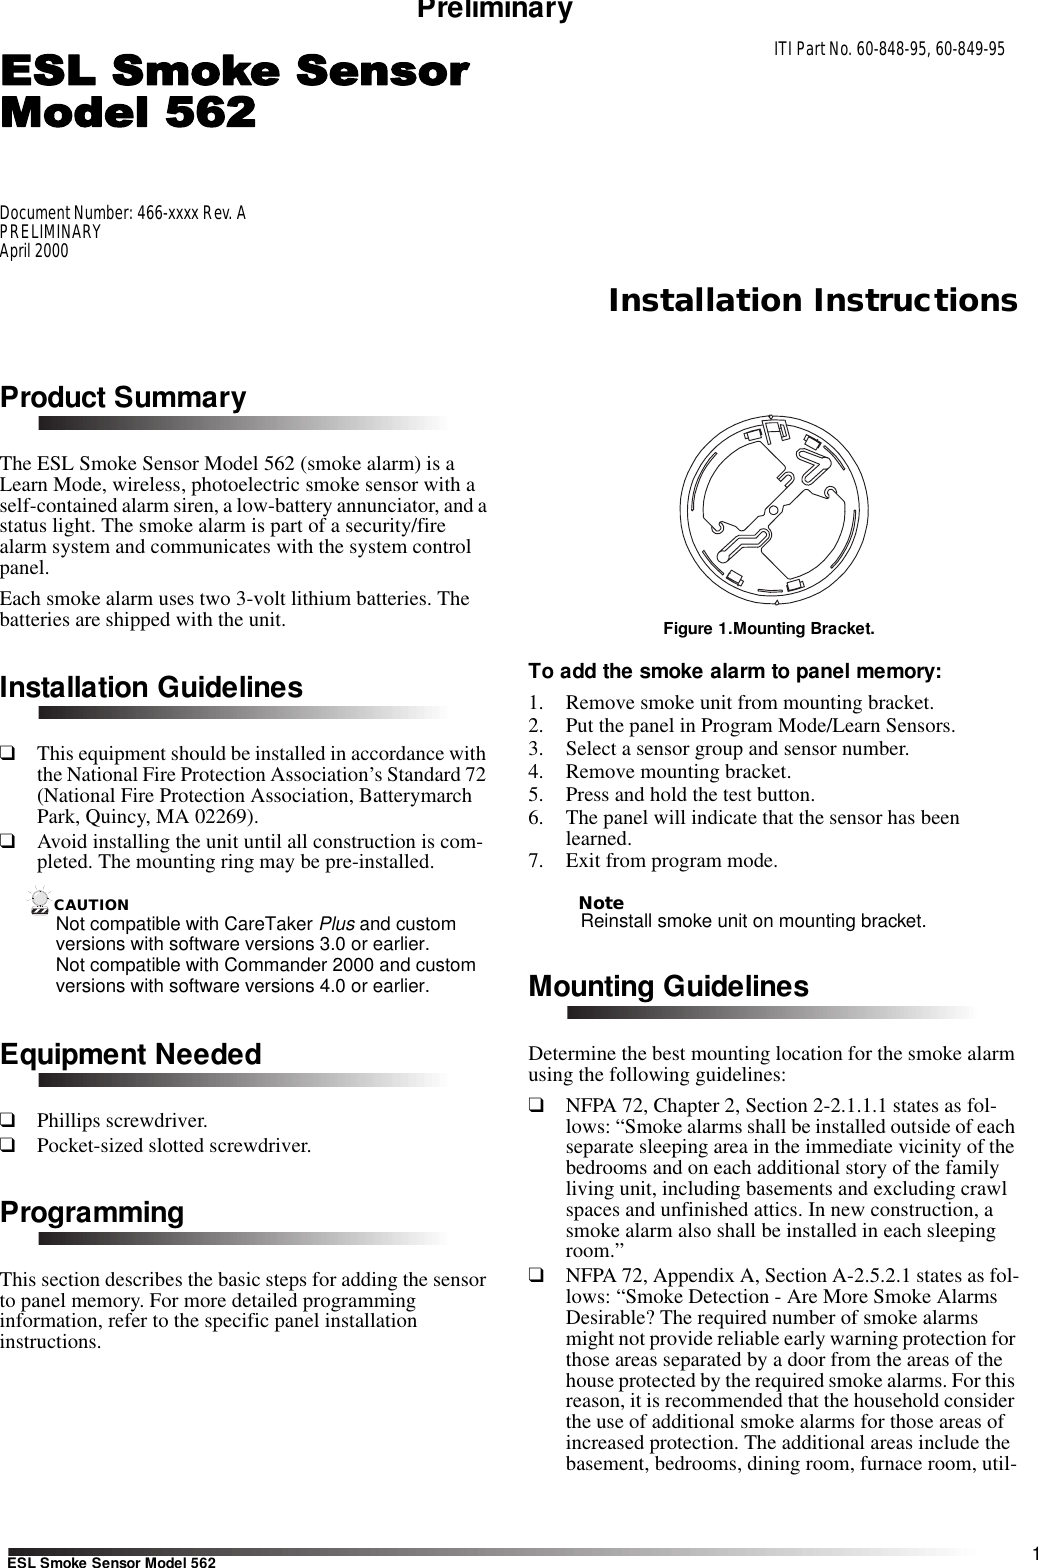 Installation Instructions1ESL Smoke Sensor Model 562PreliminaryProduct SummaryThe ESL Smoke Sensor Model 562 (smoke alarm) is a Learn Mode, wireless, photoelectric smoke sensor with a self-contained alarm siren, a low-battery annunciator, and a status light. The smoke alarm is part of a security/fire alarm system and communicates with the system control panel. Each smoke alarm uses two 3-volt lithium batteries. The batteries are shipped with the unit.Installation Guidelines❑This equipment should be installed in accordance with the National Fire Protection Association’s Standard 72 (National Fire Protection Association, Batterymarch Park, Quincy, MA 02269).❑Avoid installing the unit until all construction is com-pleted. The mounting ring may be pre-installed.CAUTIONNot compatible with CareTaker Plus and custom versions with software versions 3.0 or earlier. Not compatible with Commander 2000 and custom versions with software versions 4.0 or earlier. Equipment Needed❑Phillips screwdriver.❑Pocket-sized slotted screwdriver.ProgrammingThis section describes the basic steps for adding the sensor to panel memory. For more detailed programming information, refer to the specific panel installation instructions.Figure 1.Mounting Bracket.To add the smoke alarm to panel memory:1. Remove smoke unit from mounting bracket.2. Put the panel in Program Mode/Learn Sensors.3. Select a sensor group and sensor number. 4. Remove mounting bracket.5. Press and hold the test button.6. The panel will indicate that the sensor has been learned. 7. Exit from program mode.NoteReinstall smoke unit on mounting bracket. Mounting GuidelinesDetermine the best mounting location for the smoke alarm using the following guidelines:❑NFPA 72, Chapter 2, Section 2-2.1.1.1 states as fol-lows: “Smoke alarms shall be installed outside of each separate sleeping area in the immediate vicinity of the bedrooms and on each additional story of the family living unit, including basements and excluding crawl spaces and unfinished attics. In new construction, a smoke alarm also shall be installed in each sleeping room.”❑NFPA 72, Appendix A, Section A-2.5.2.1 states as fol-lows: “Smoke Detection - Are More Smoke Alarms Desirable? The required number of smoke alarms might not provide reliable early warning protection for those areas separated by a door from the areas of the house protected by the required smoke alarms. For this reason, it is recommended that the household consider the use of additional smoke alarms for those areas of increased protection. The additional areas include the basement, bedrooms, dining room, furnace room, util-Document Number: 466-xxxx Rev. APRELIMINARYApril 2000ITI Part No. 60-848-95, 60-849-95